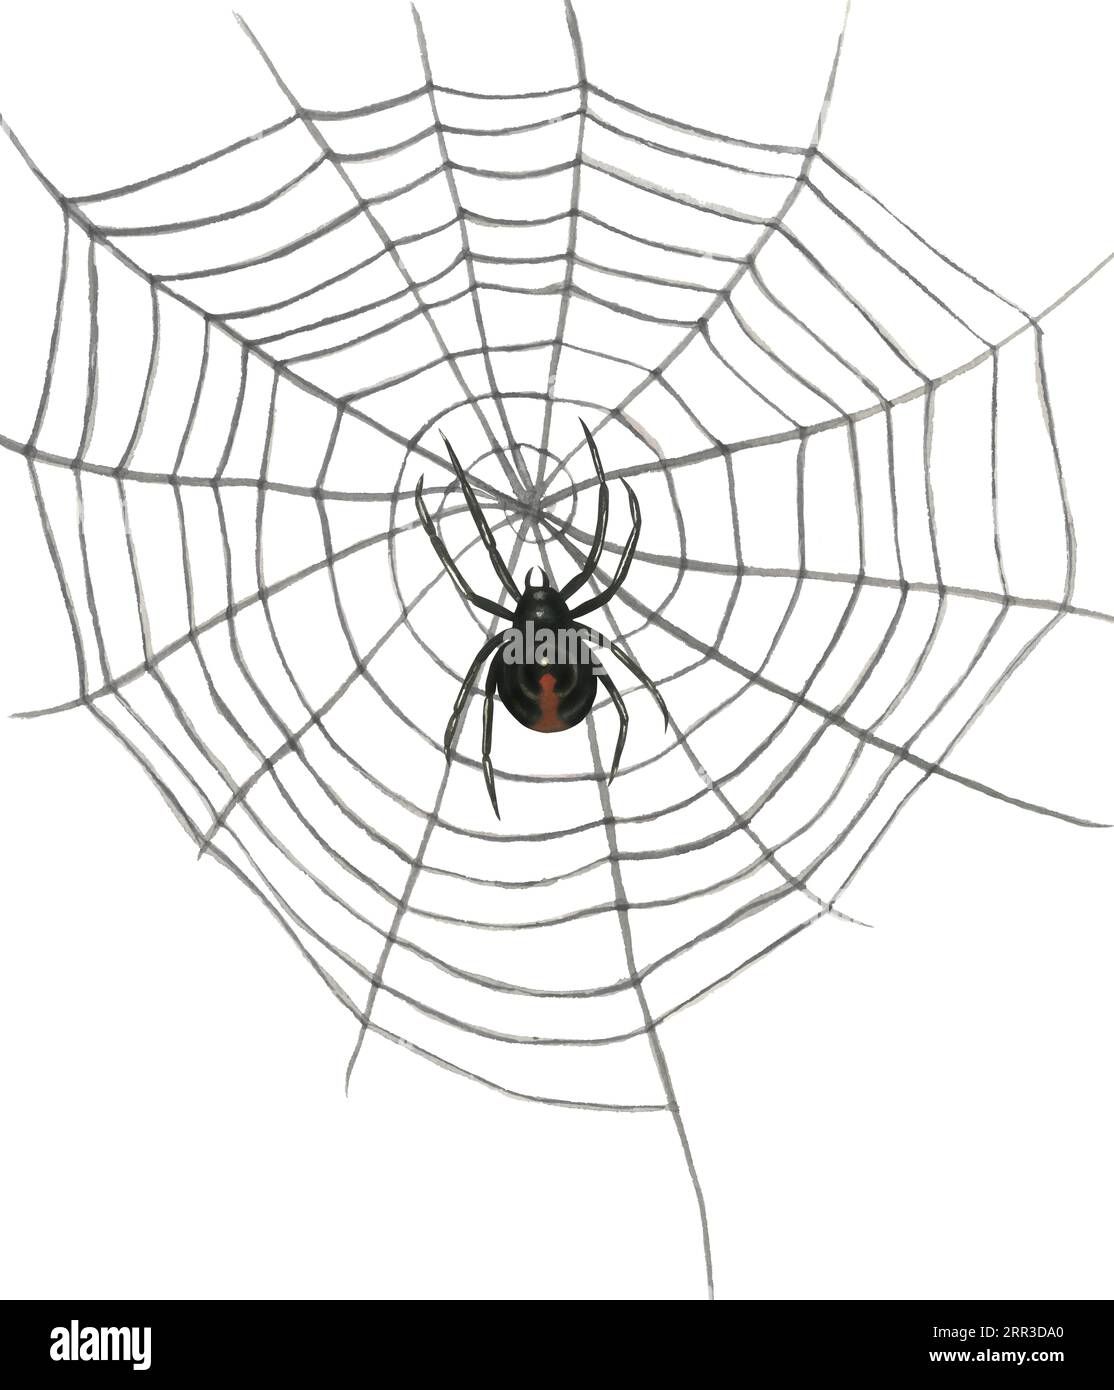 Watercolor illustration of a web with a black widow spider. Isolated on white background hand drawn Stock Photo